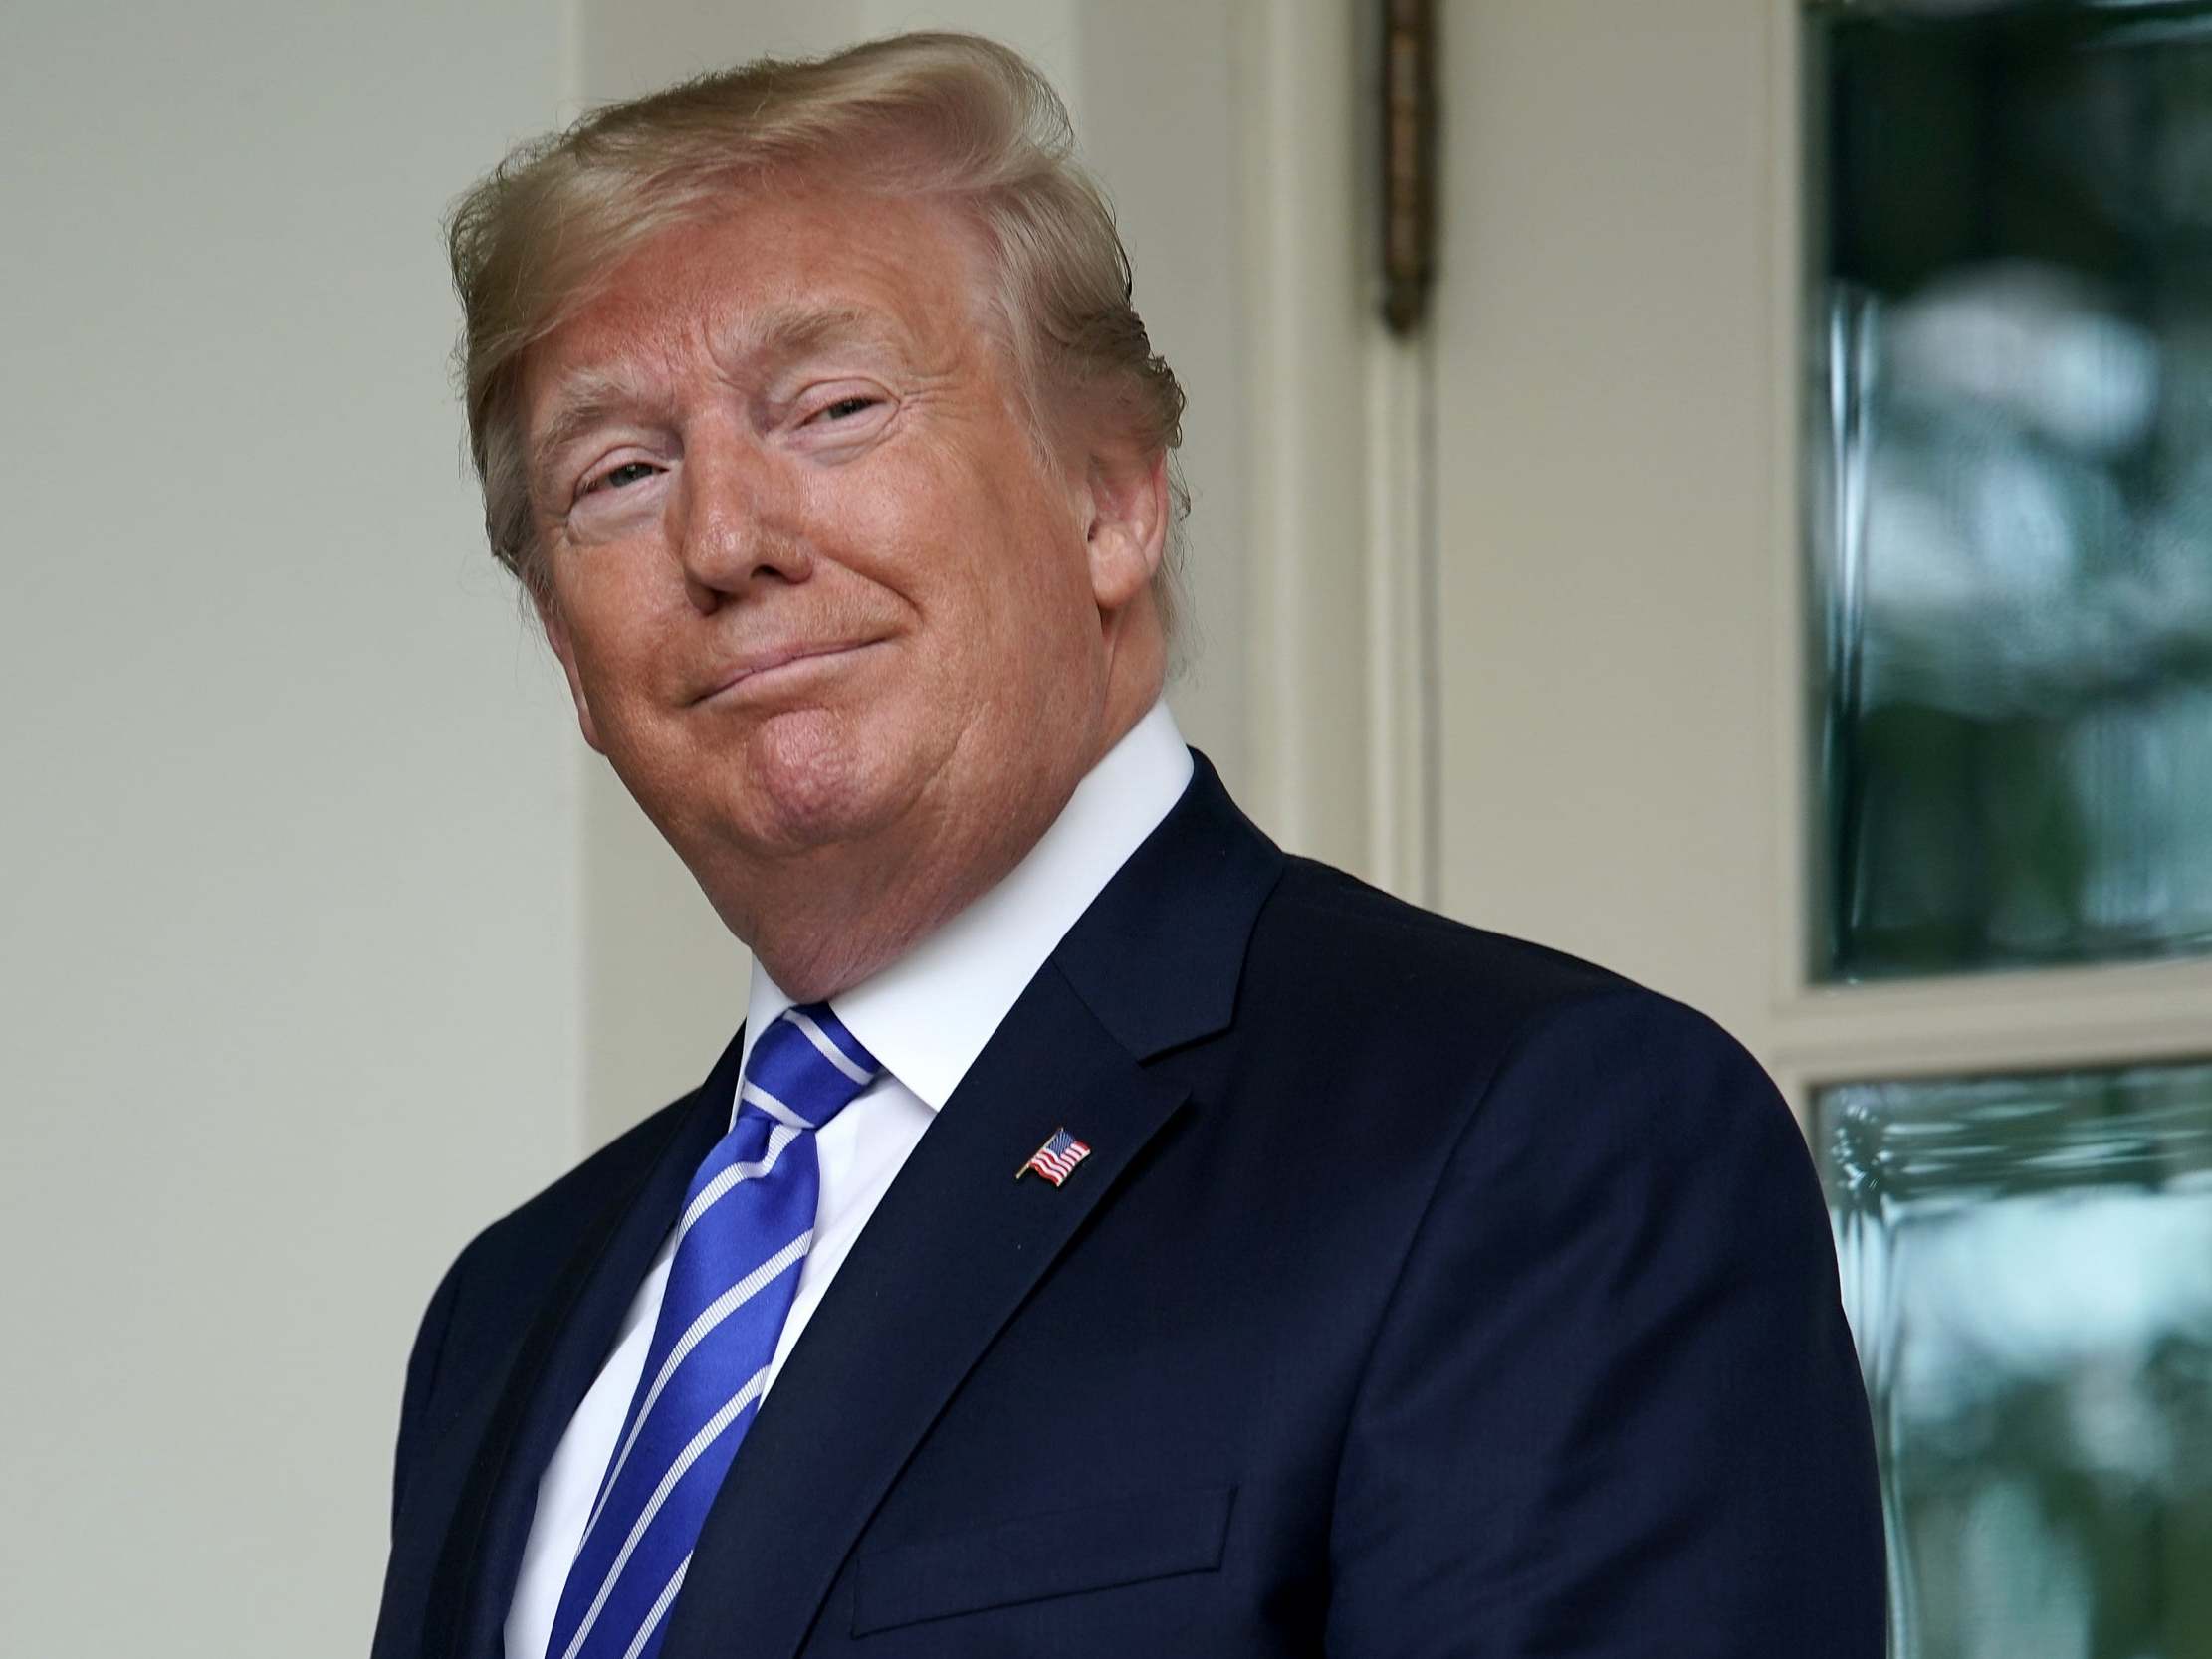 Trump news – live: President pushes Obama lie during late-night Twitter tirade, as impeachment support surges in Congress